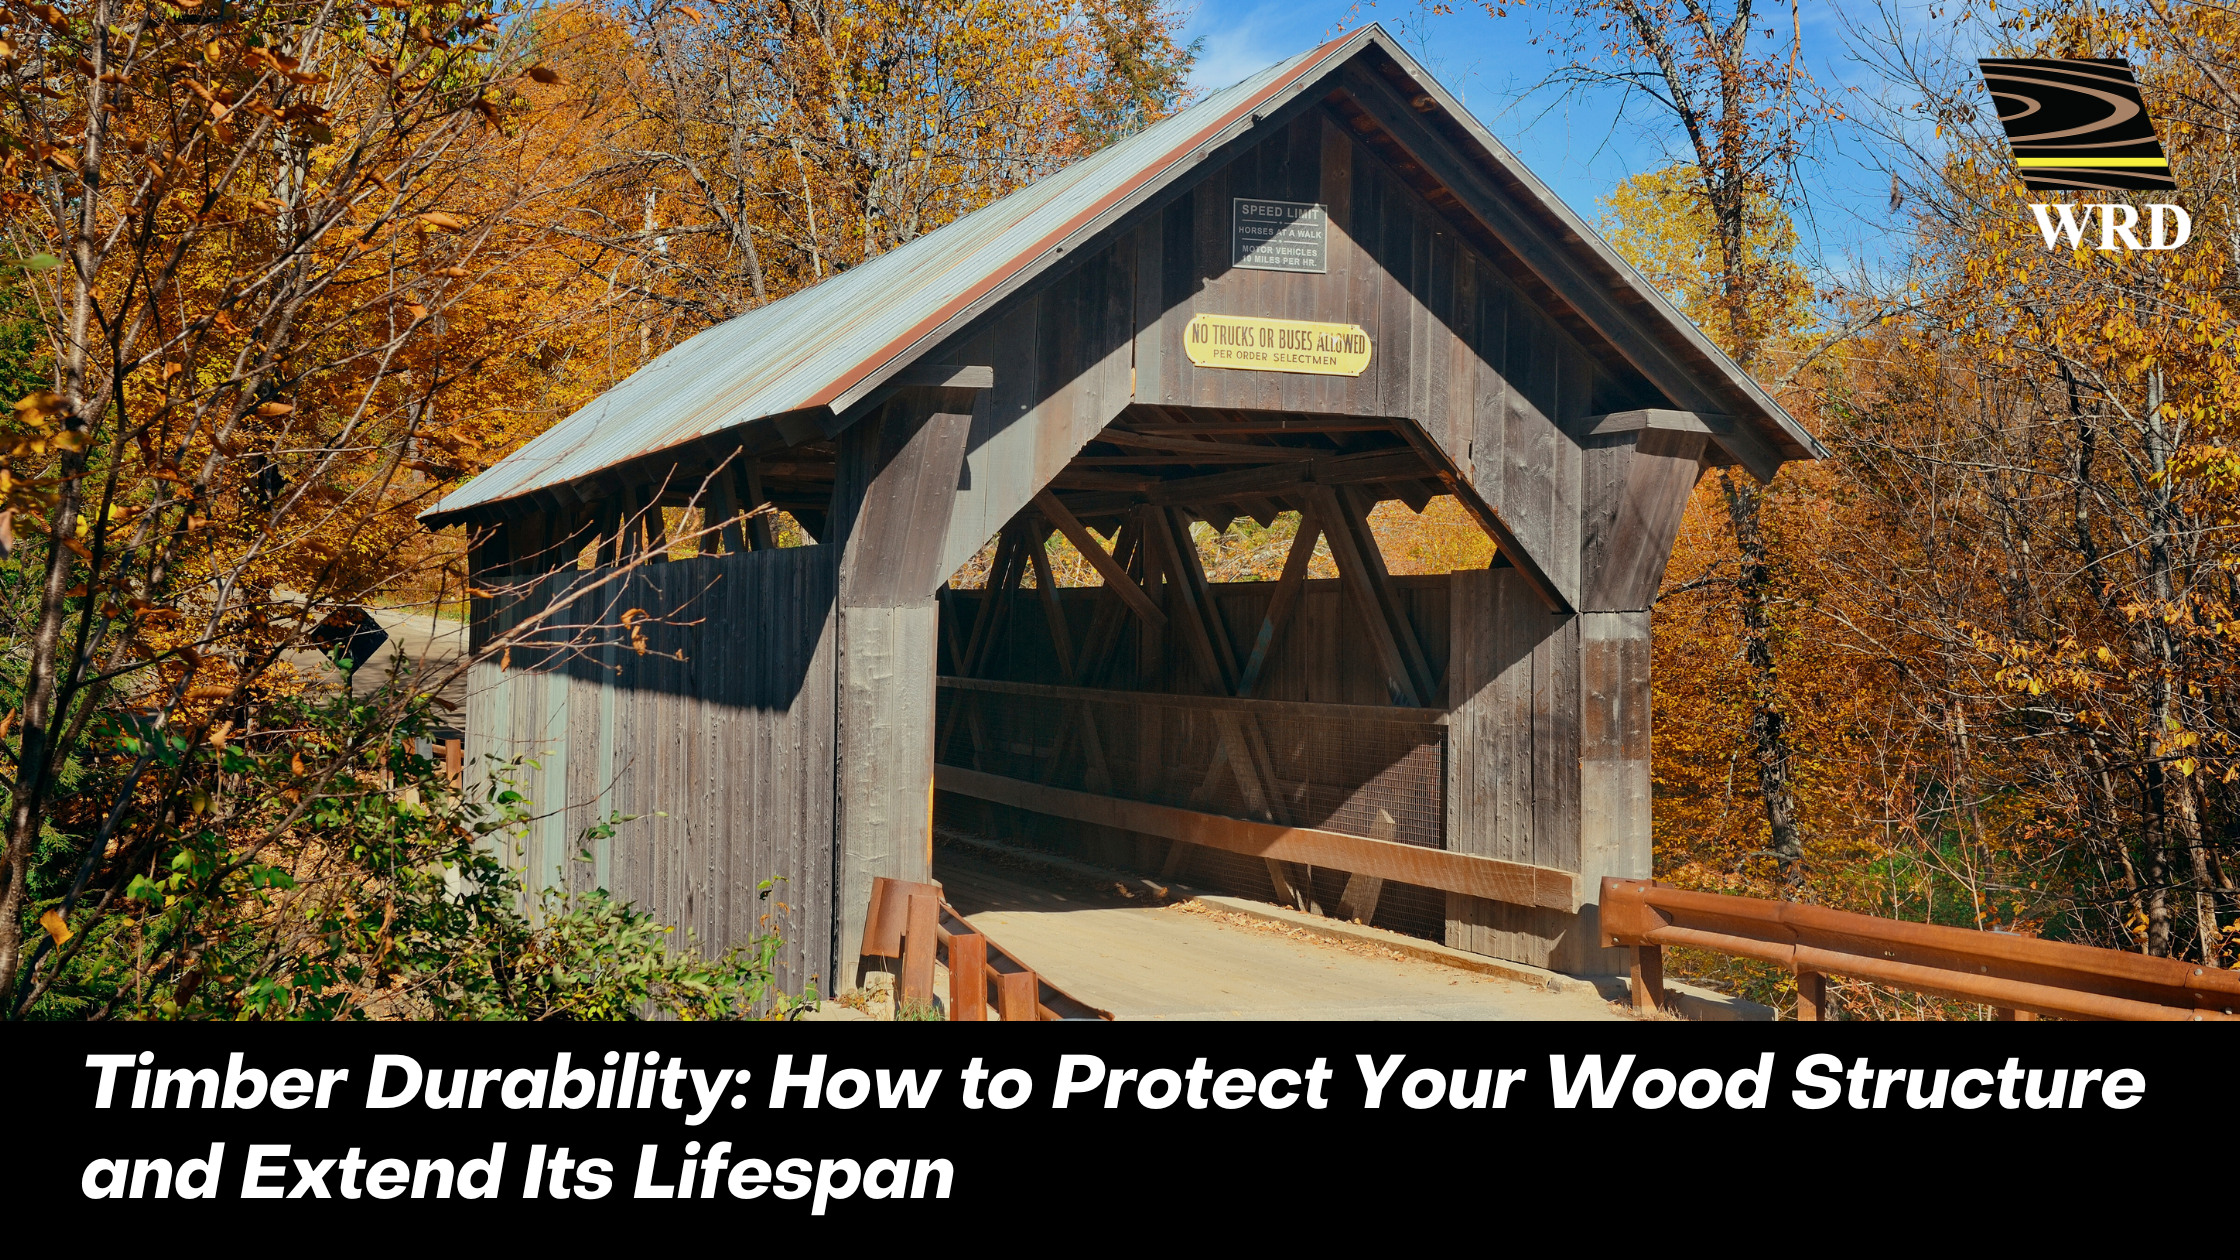 Timber-Durability-How-to-Protect-Your-Wood-Structure-and-Extend-Its-Lifespan.